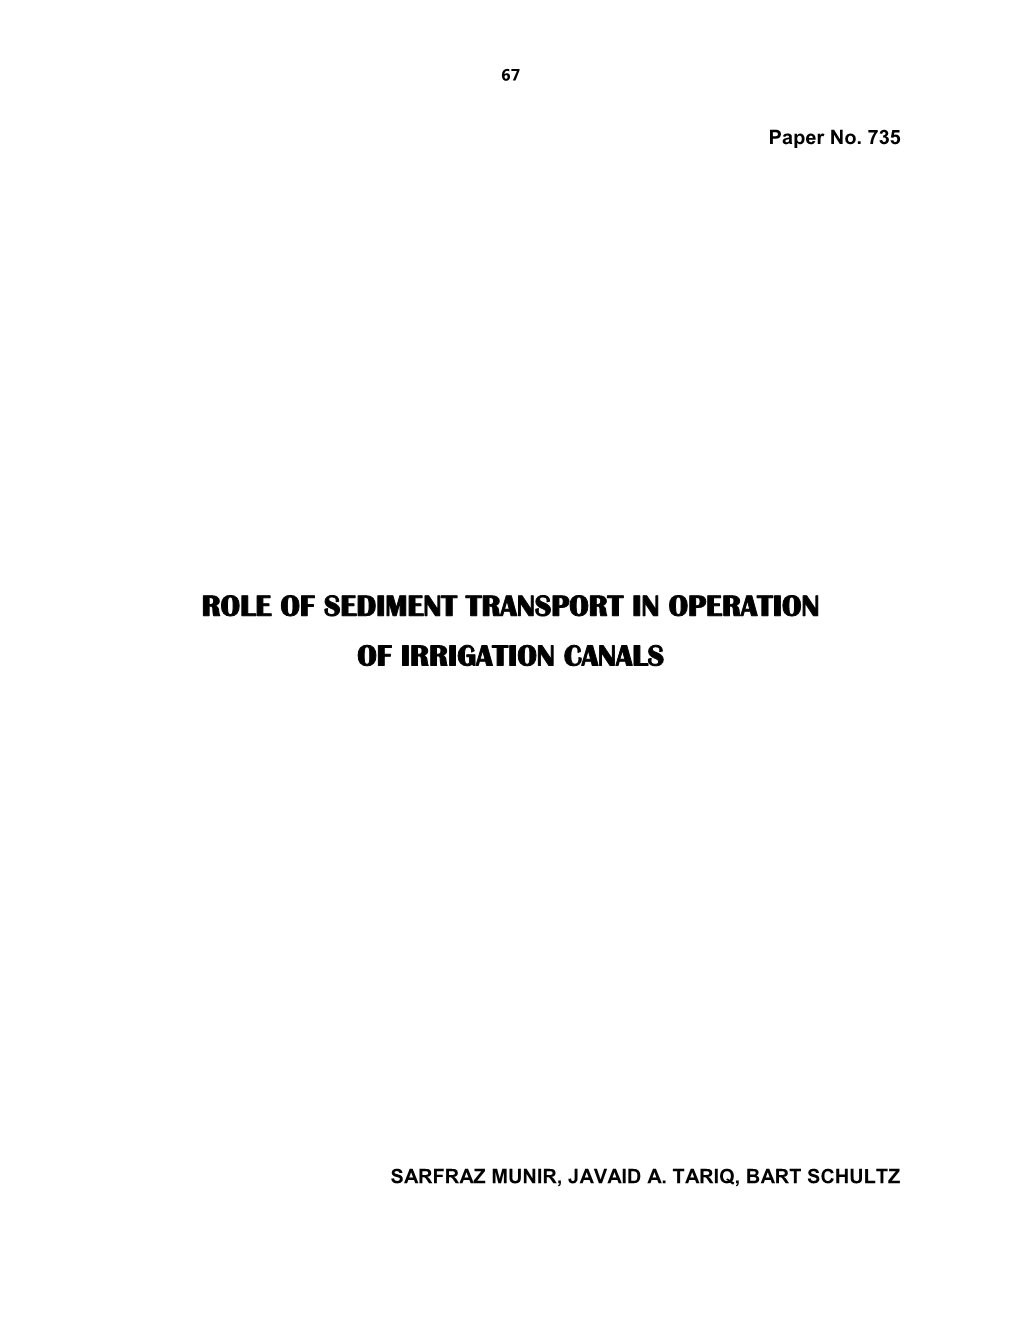 Role of Sediment Transport in Operation of Irrigation Canals